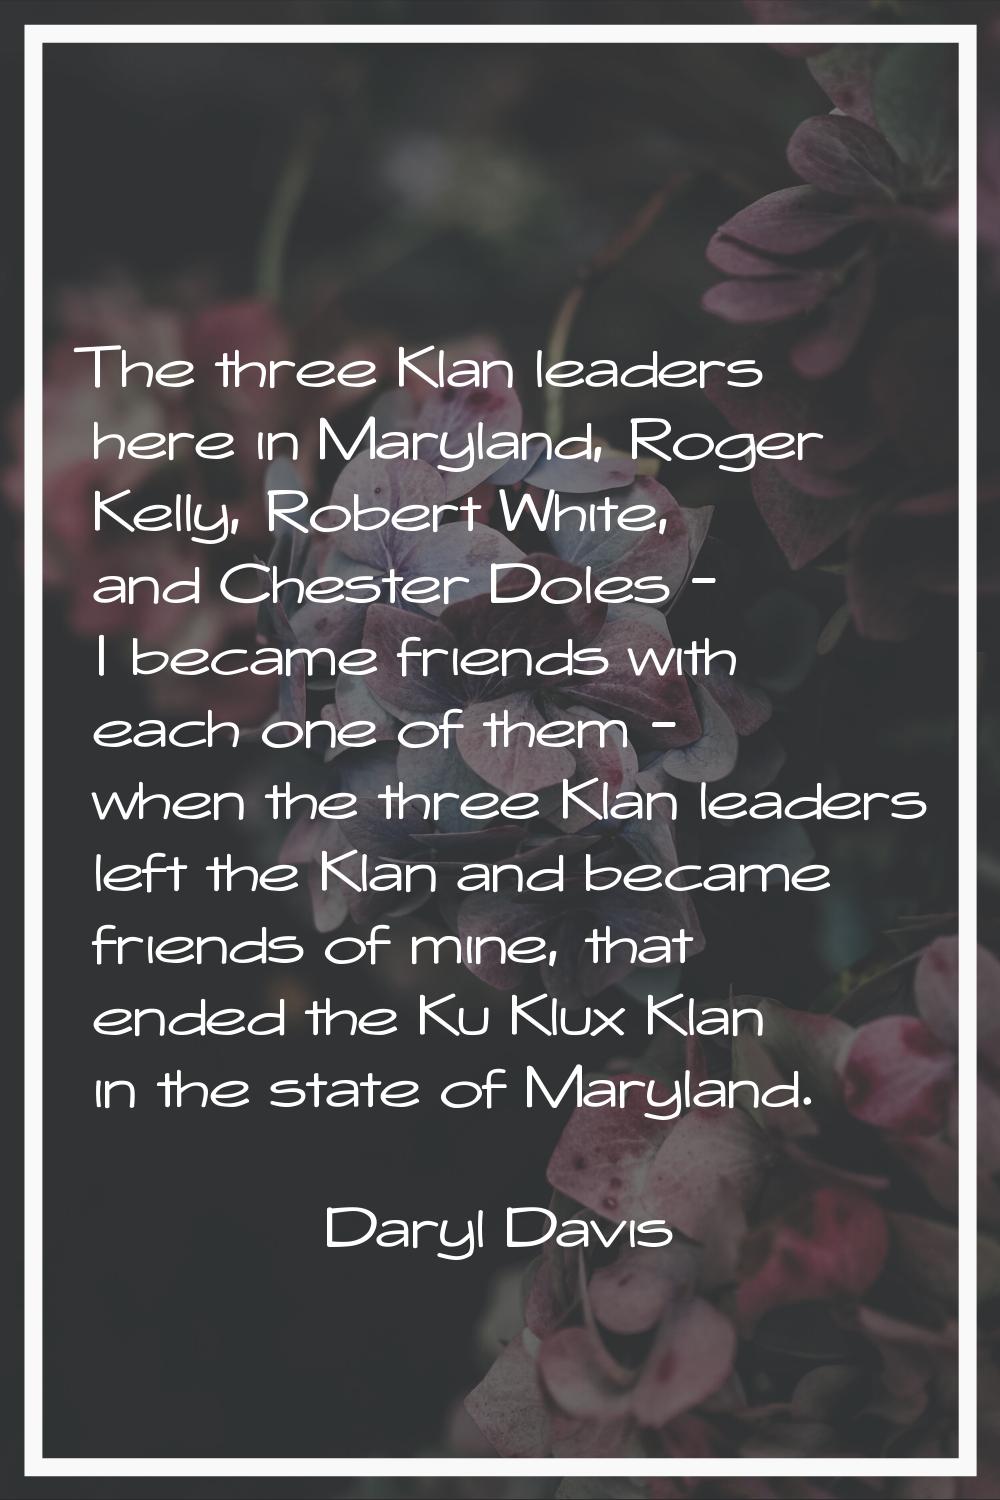 The three Klan leaders here in Maryland, Roger Kelly, Robert White, and Chester Doles - I became fr